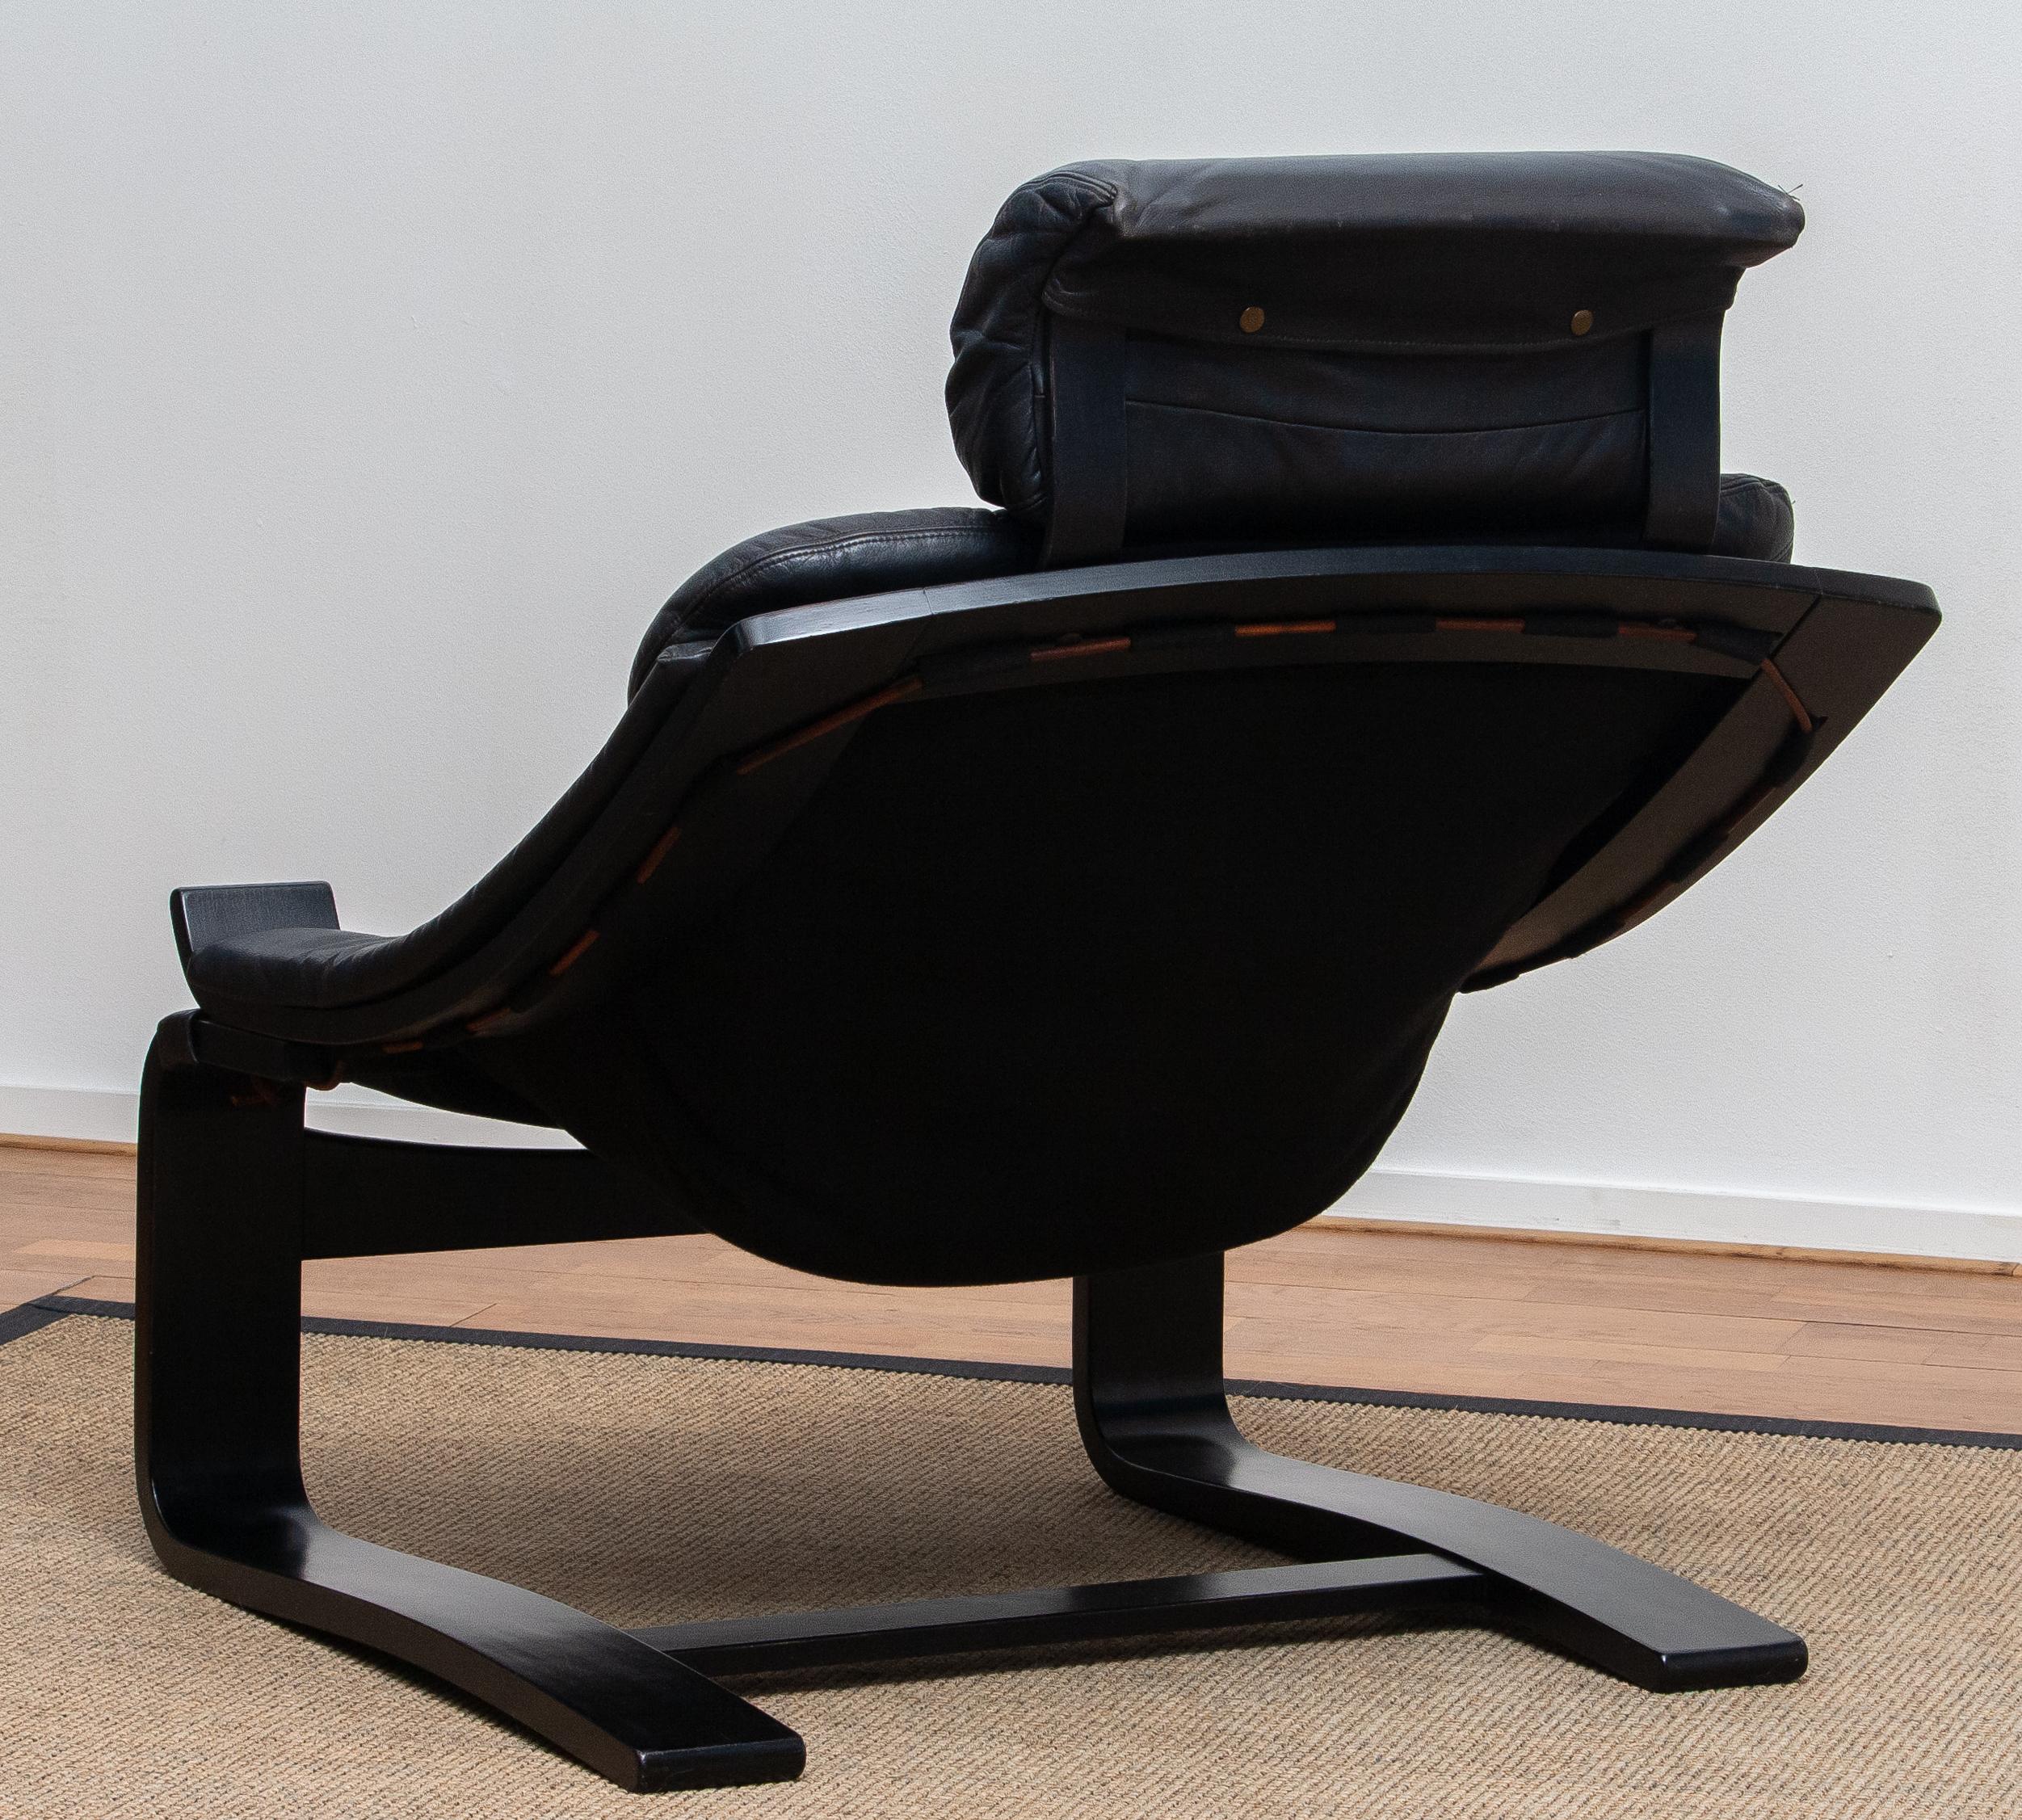 1970s, Black 'Kroken' Lounge Chair by Ake Fribytter for Nelo Sweden in Leather 5